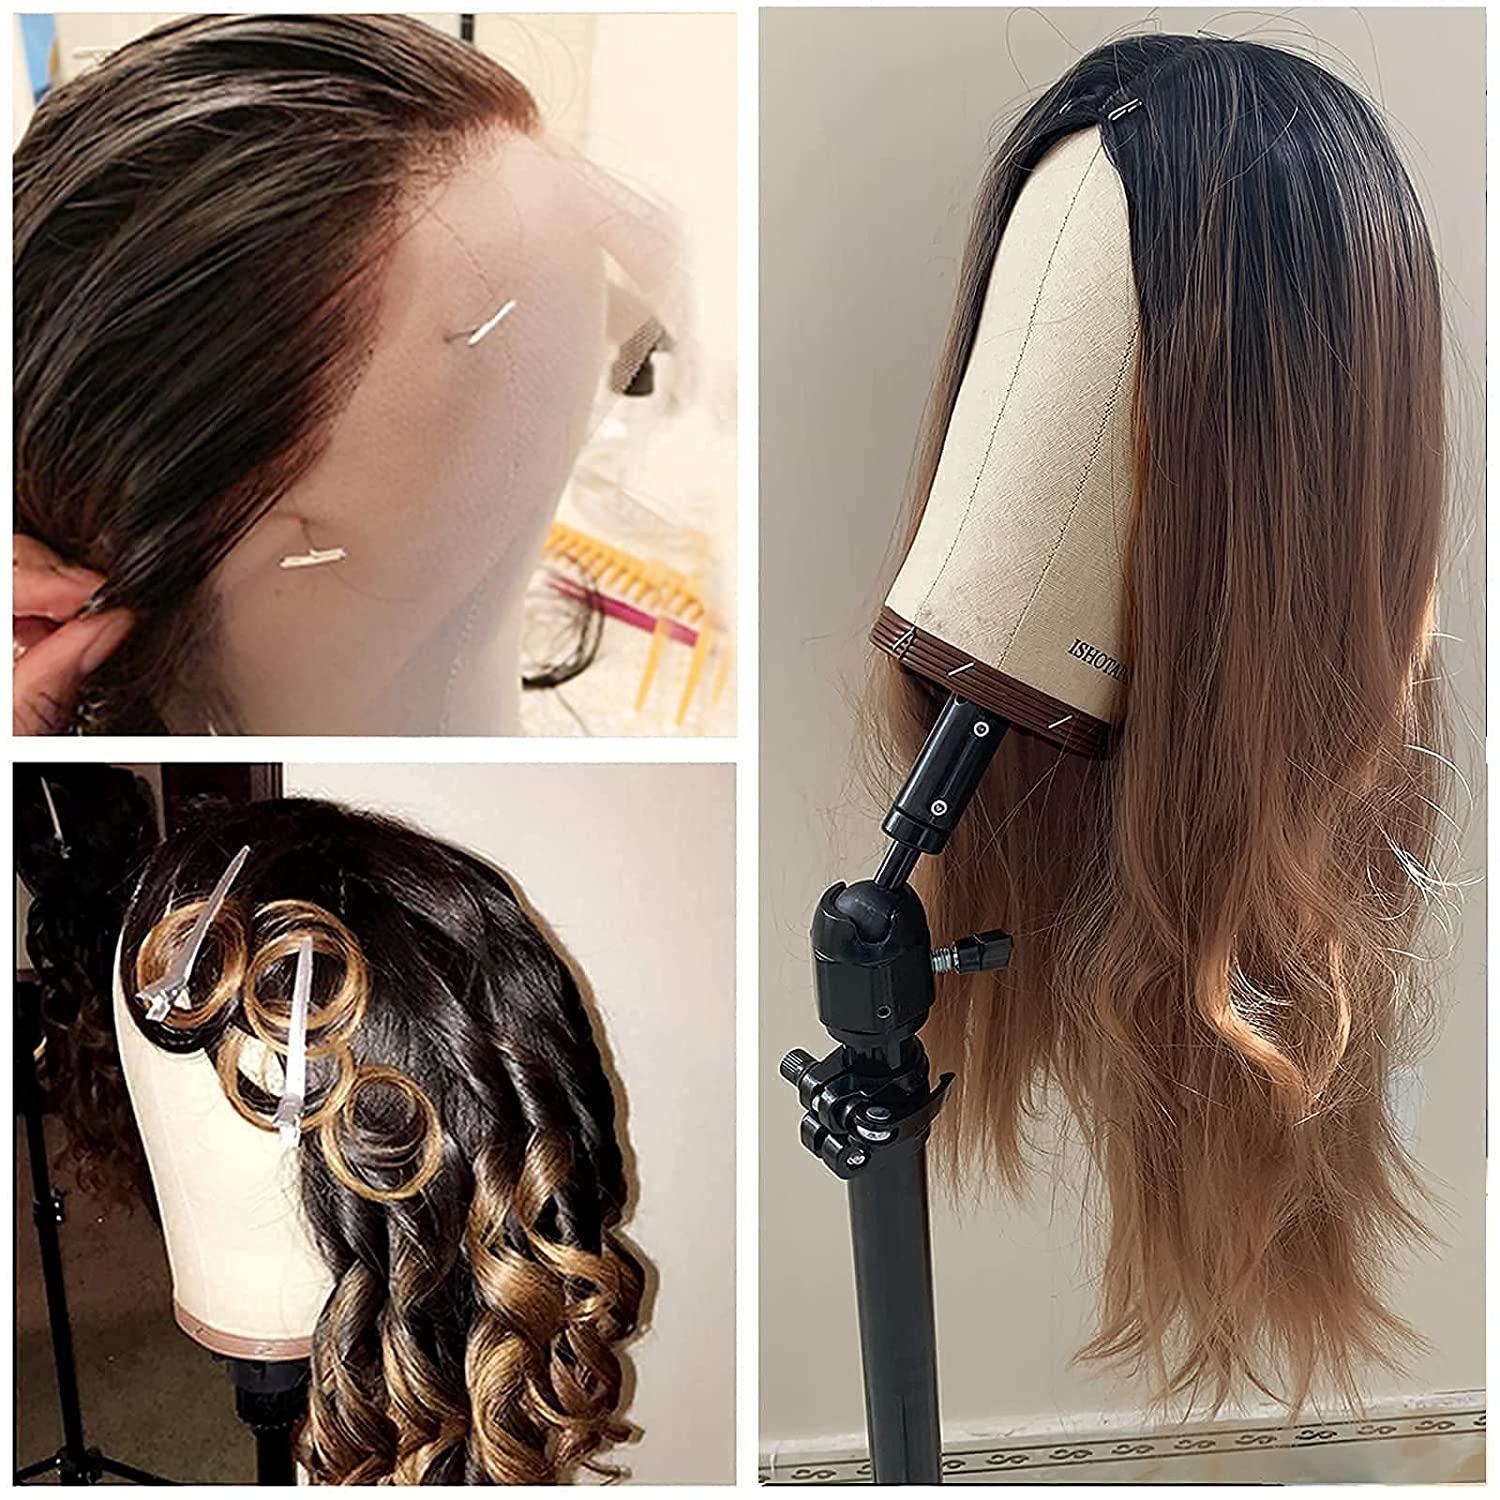 ISHOT Wig Head 23Inch,Mannequin Head With Stand,Canvas Wig Head For  Wigs,Wig Making Styling Display With Table Clamp Set